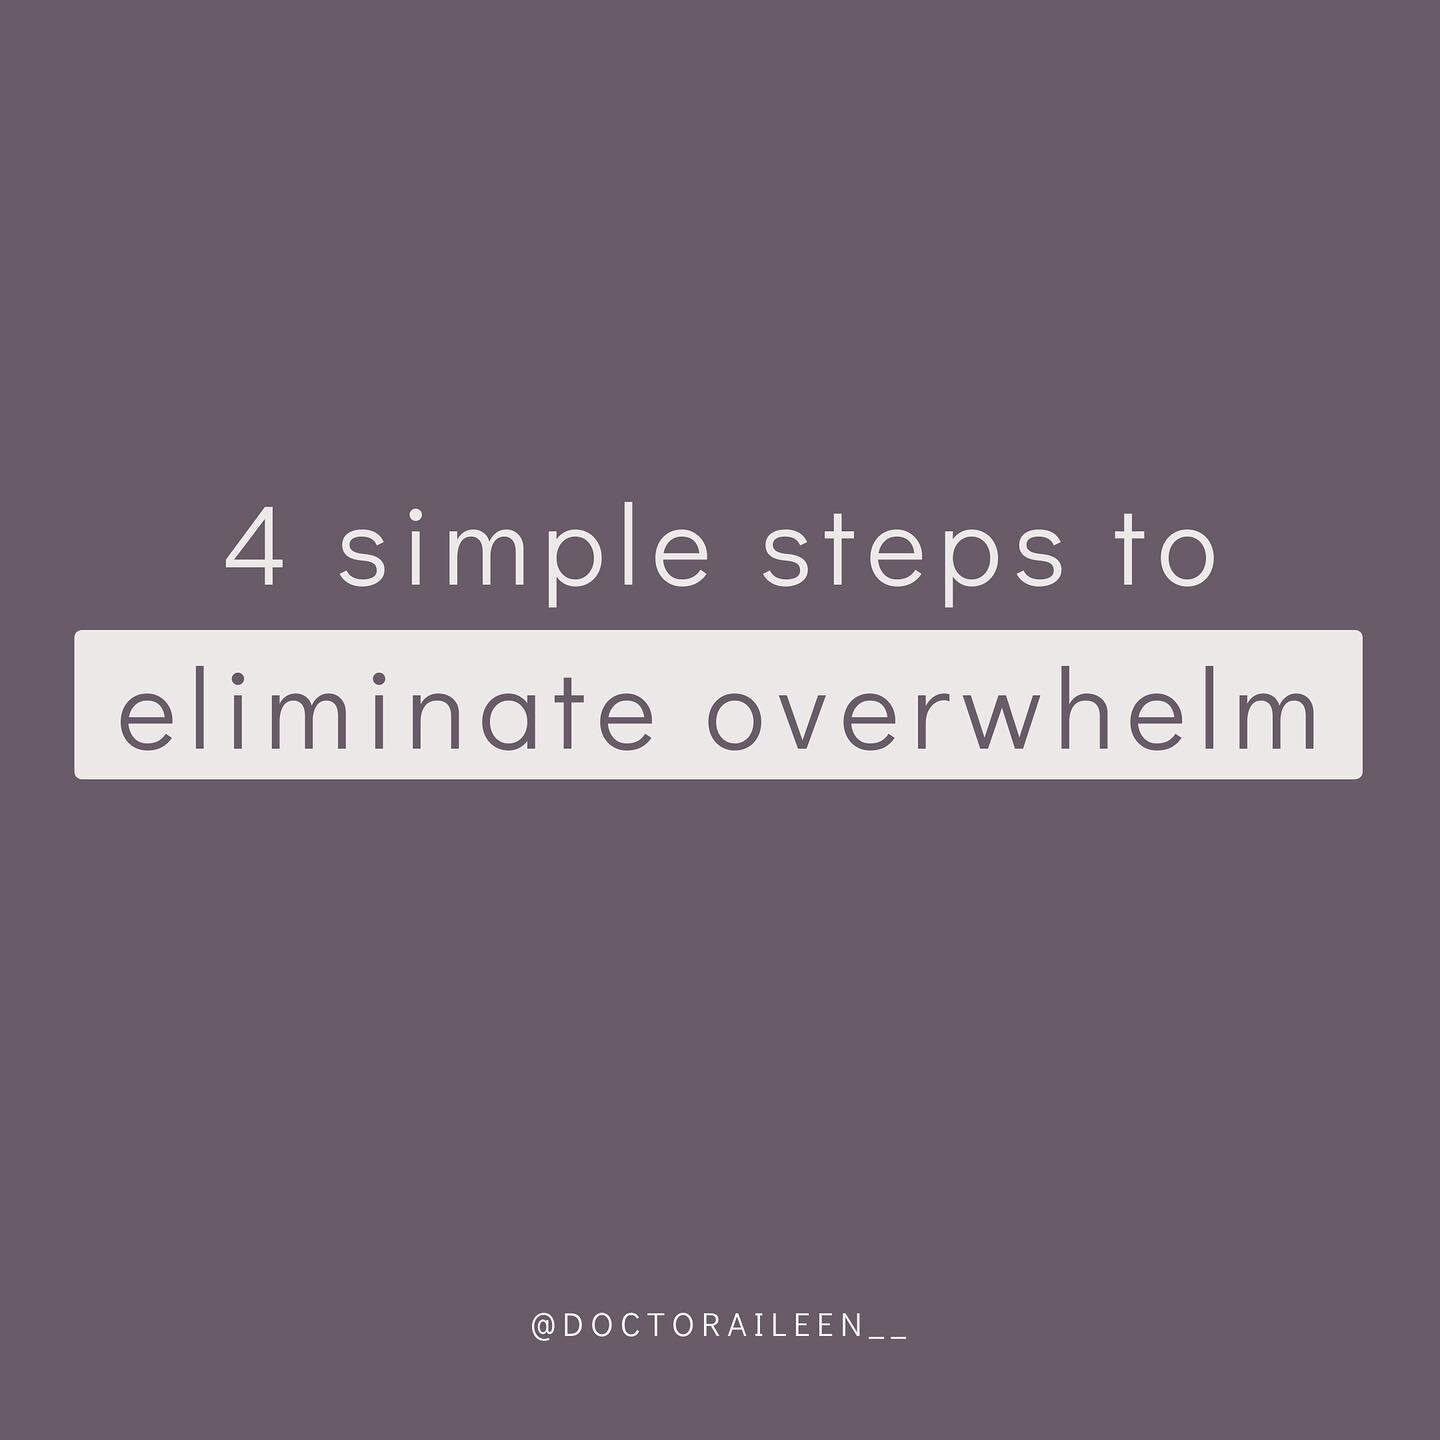 4 simple steps to eliminate overwhelm⁠⁠
⁠⁠
When&rsquo;s the last time you had far too much on, couldn&rsquo;t focus on anything and couldn&rsquo;t seem to get anything done?⁠⁠
⁠⁠
💥 That&rsquo;s overwhelm 💥⁠⁠
⁠⁠
It&rsquo;s a frenzied state of stress